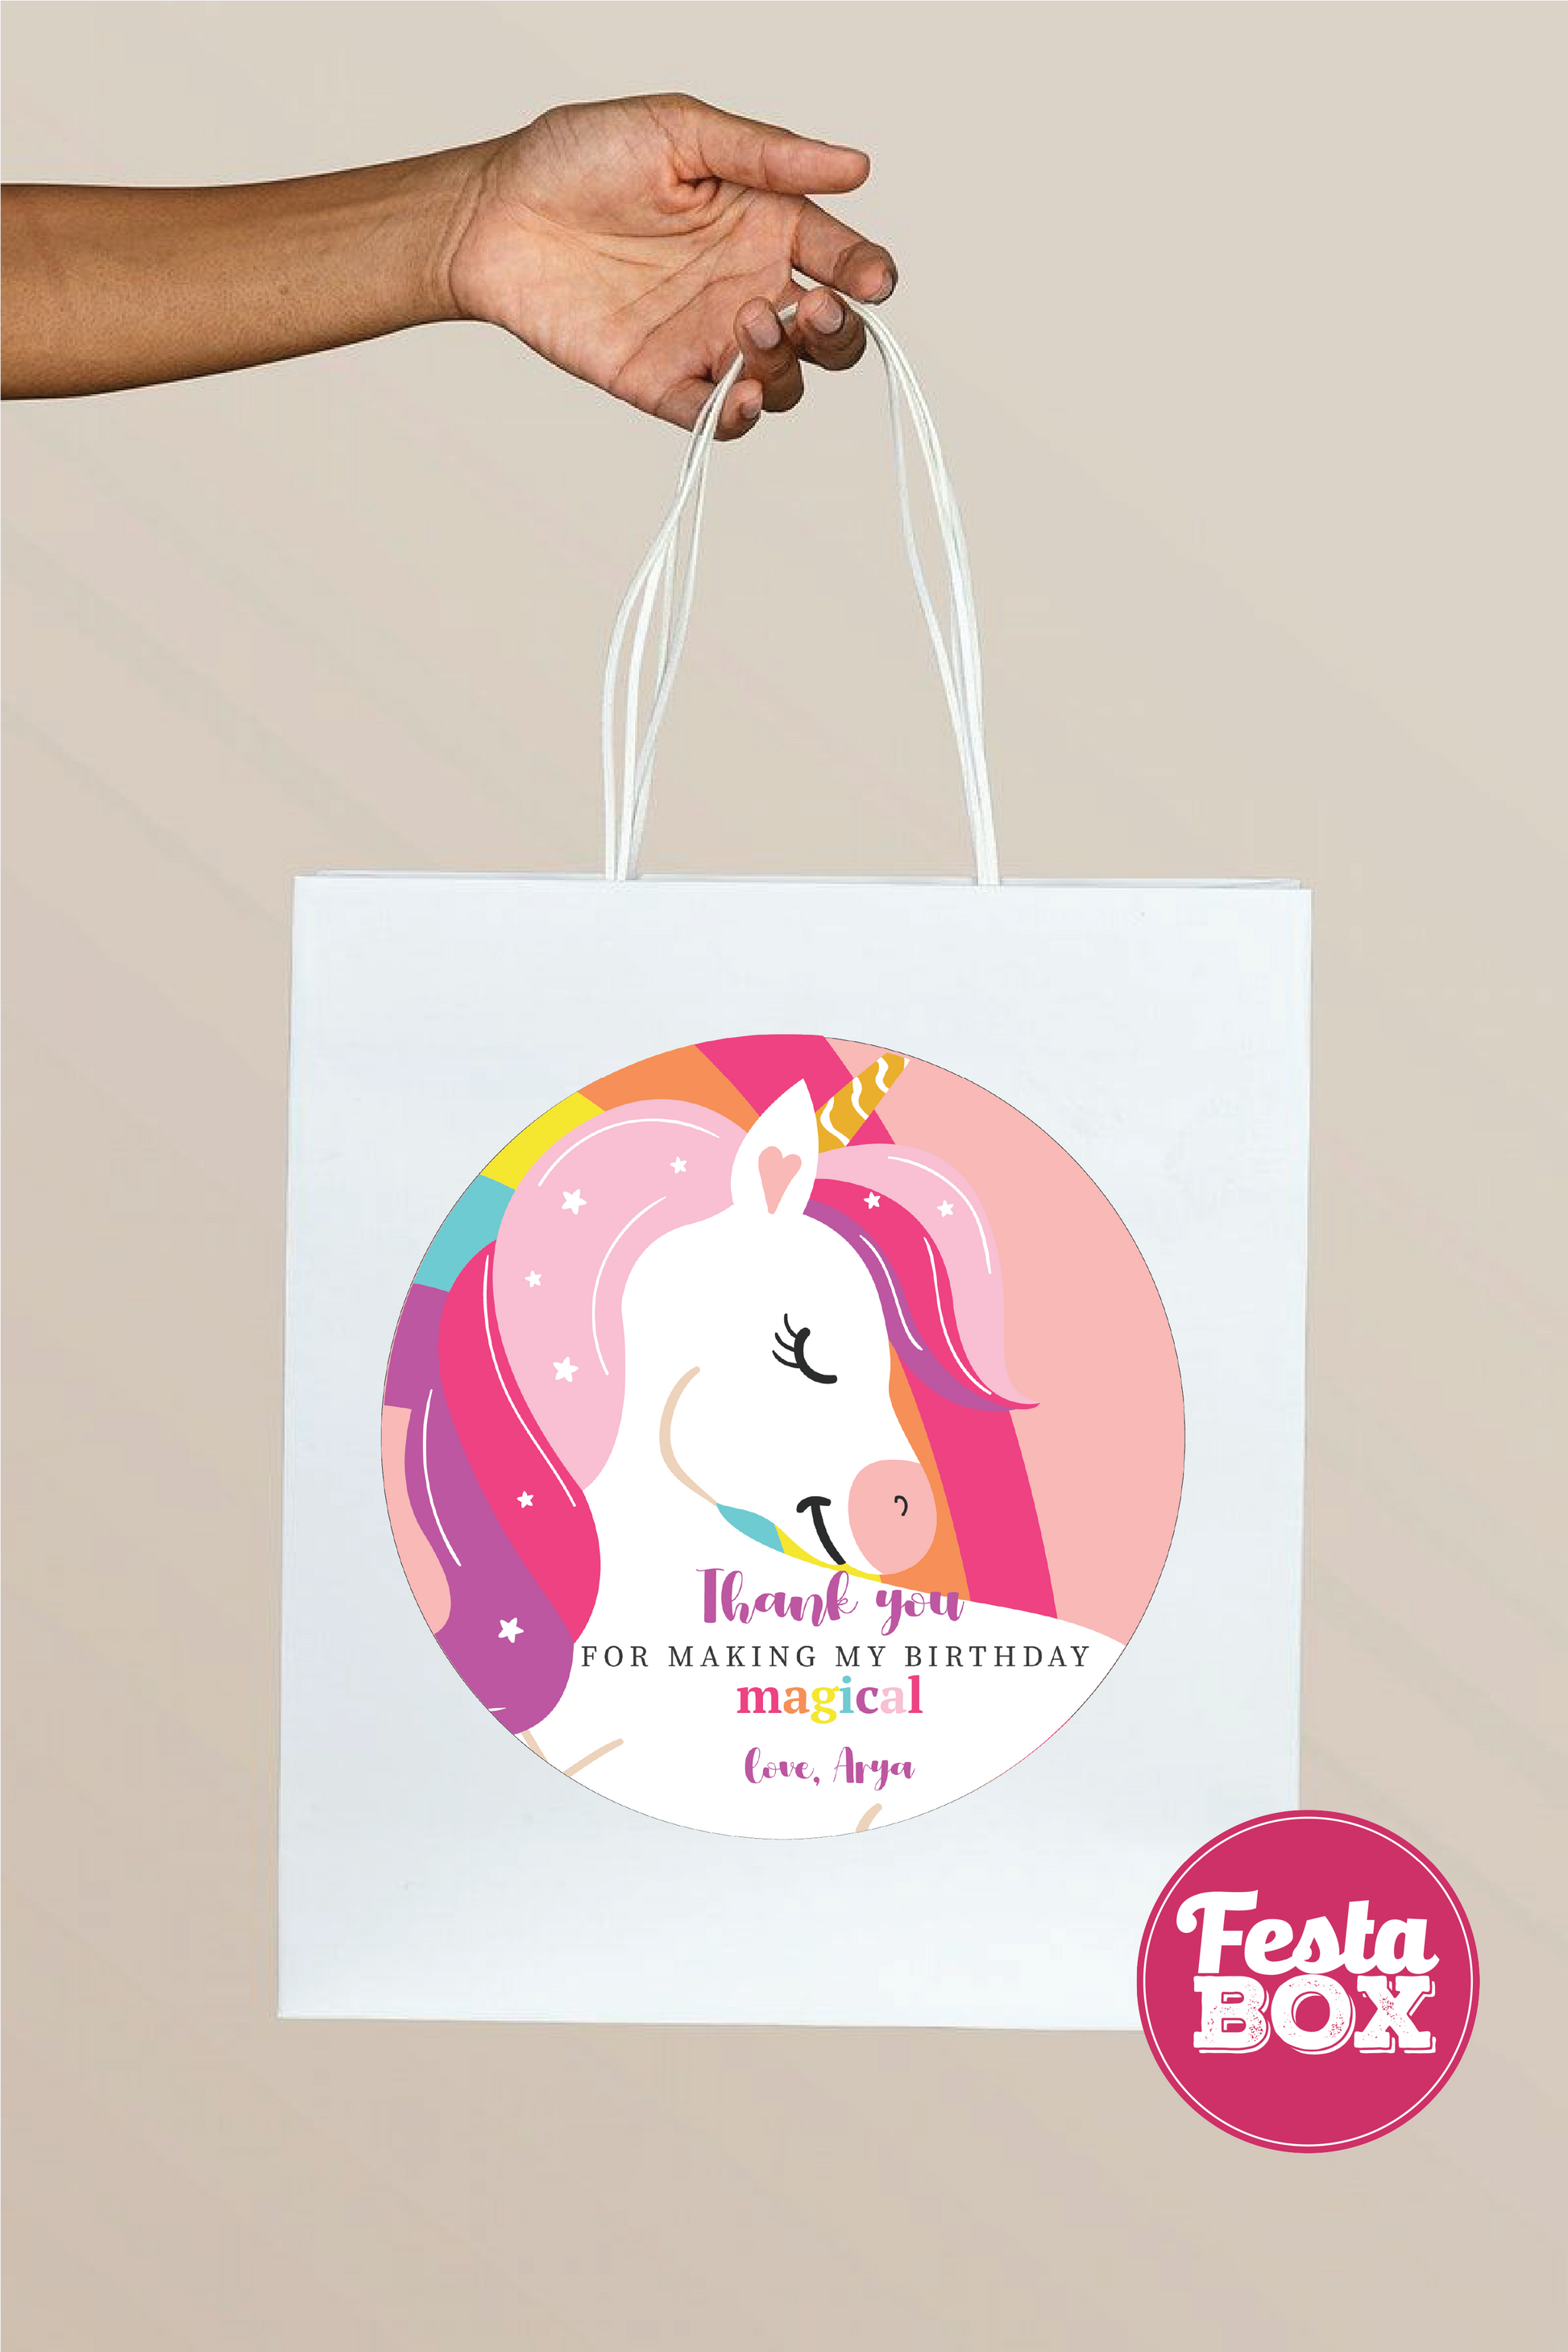 Return Gift Bags for the Birthday Party Unicorn Theme by Festabox